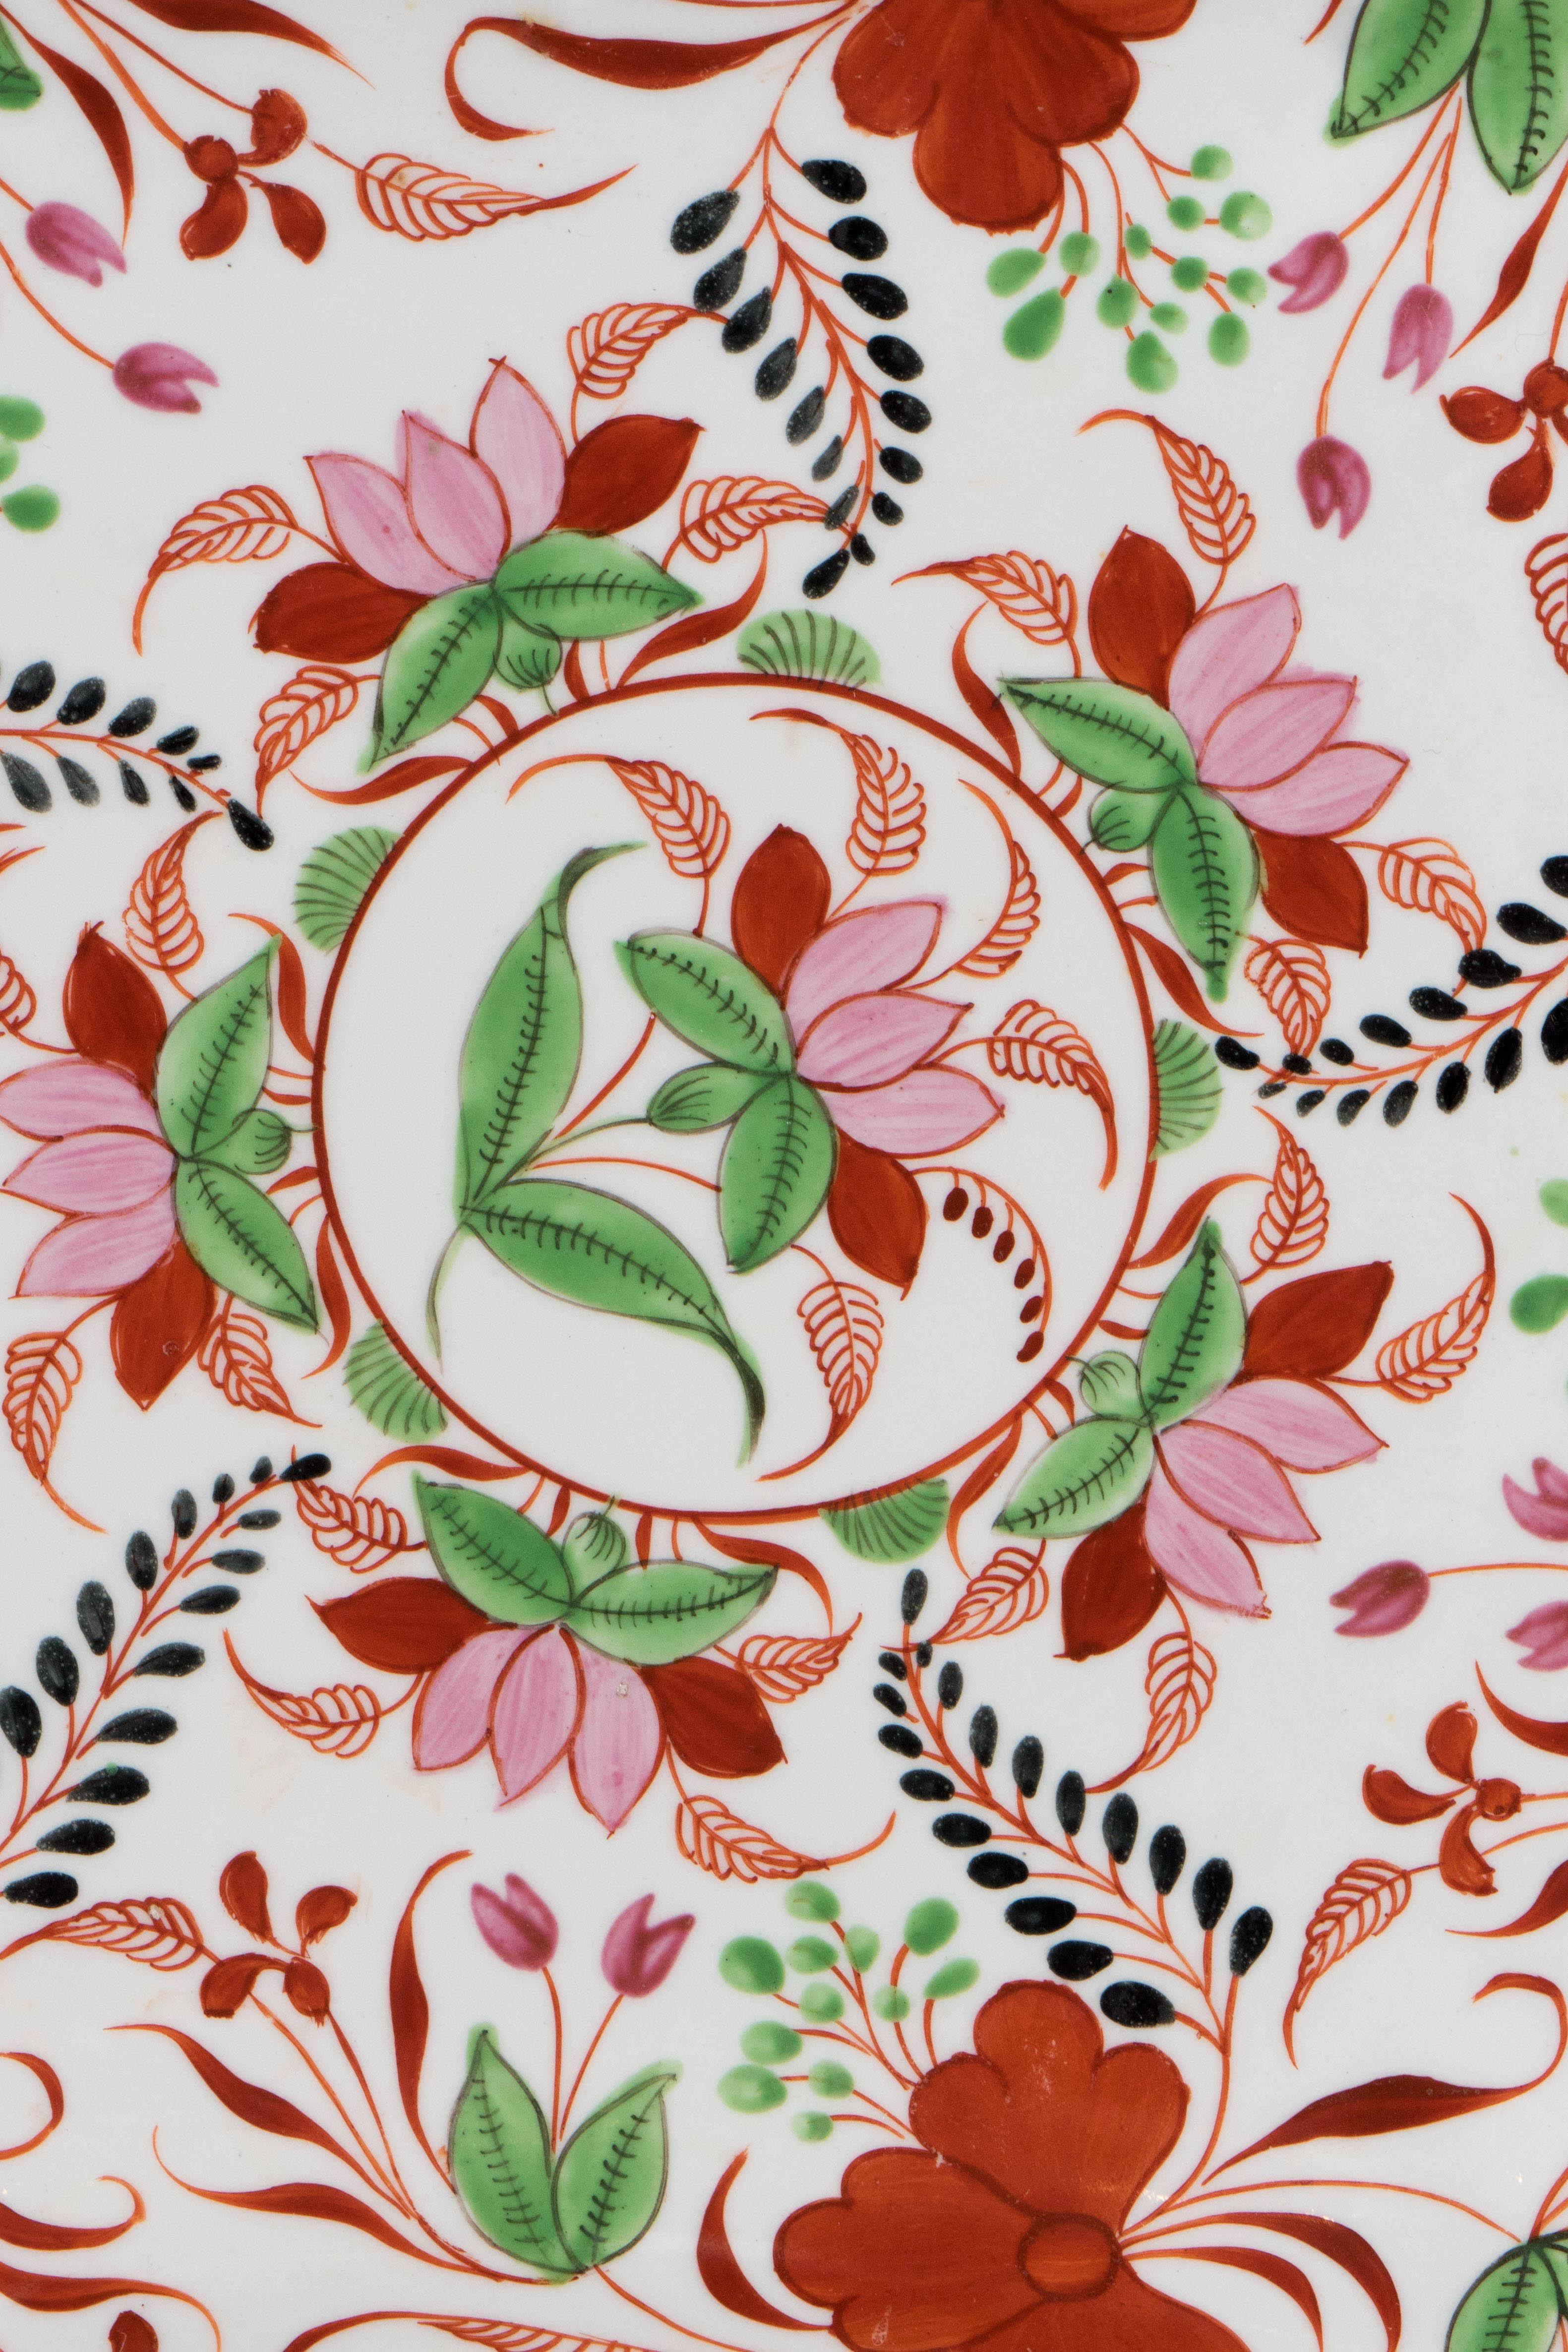 An extraordinary group of Miles Mason dishes in an striking pattern
of pink and orange flowers and green leaves.
The Miles Mason Factory made some of the finest porcelain in England during the Regency period. This group now consists of:
Two pairs